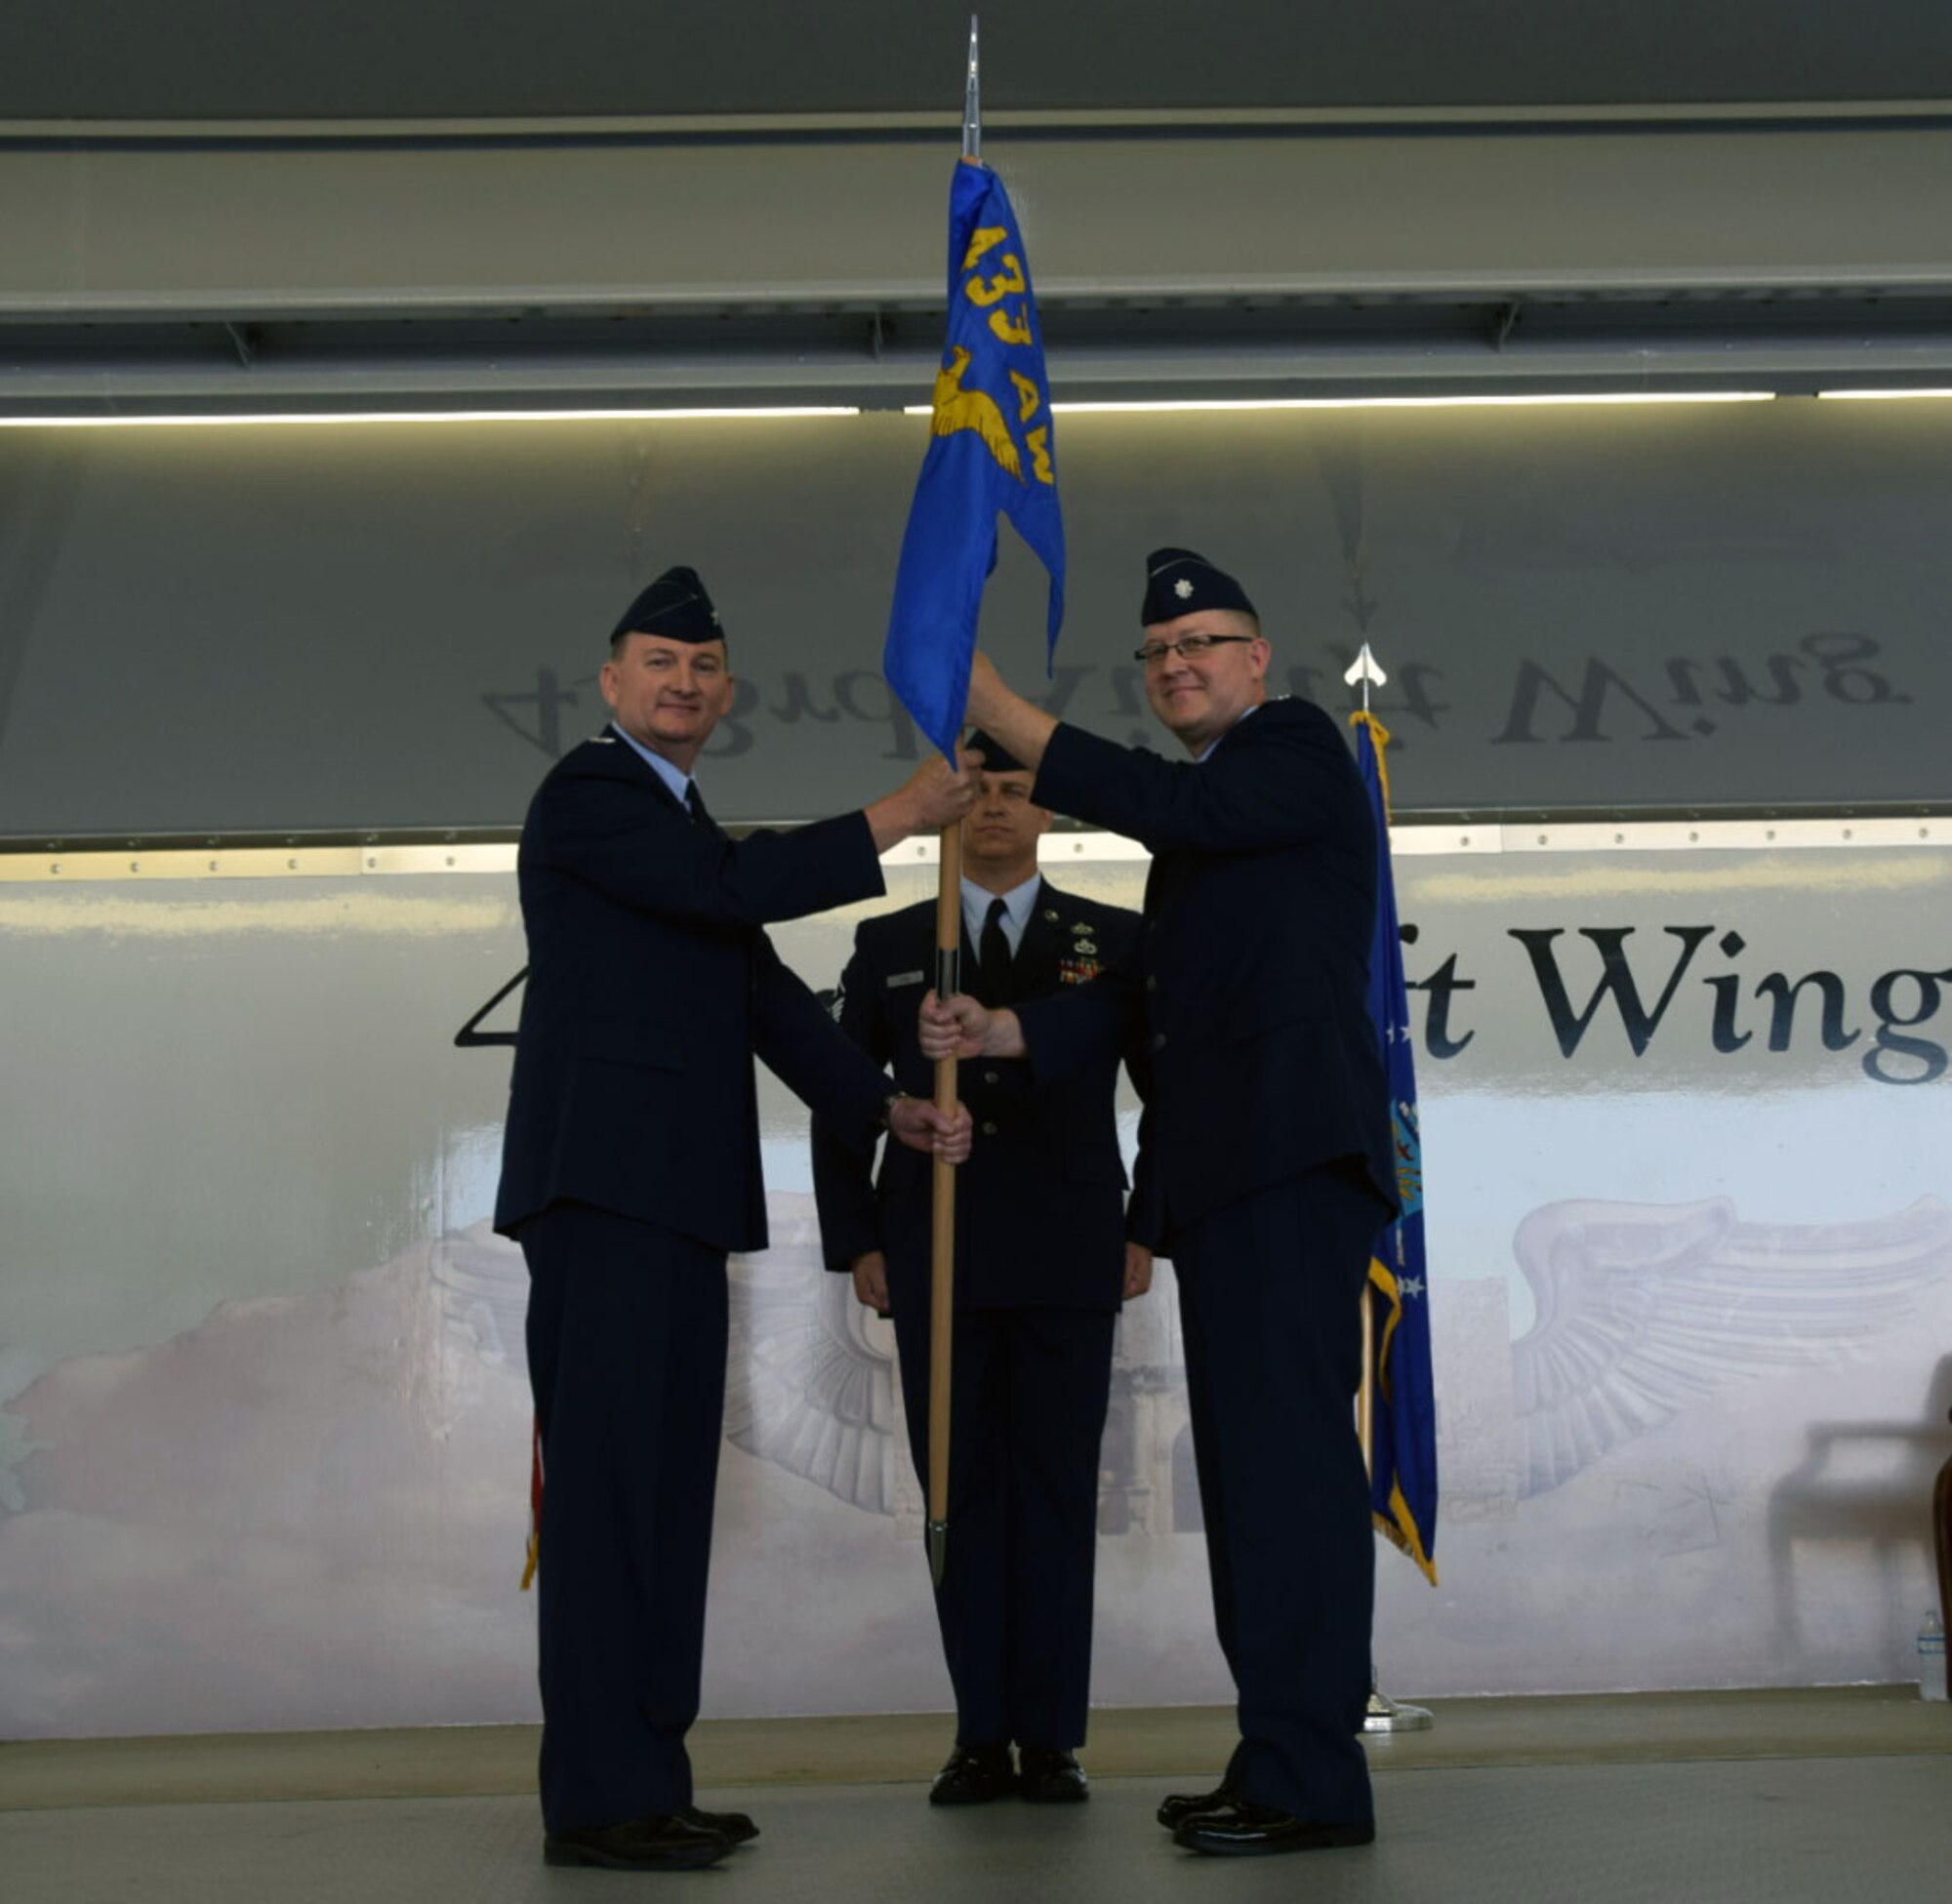 Col. Thomas K. Smith, Jr., 433rd Airlift Wing commander, passes the 433rd Maintenance Group guidon to Lt. Col. Charles V. Pratt during an assumption of command ceremony at Joint Base San Antonio-Lackland July 15, 2017. Before taking on his present role, Pratt served as the 129th Maintenance Squadron commander at Moffett Federal Air Field with the California Air National Guard. (U.S. Air Force photo/Tech Sgt. Carlos J. Trevino)